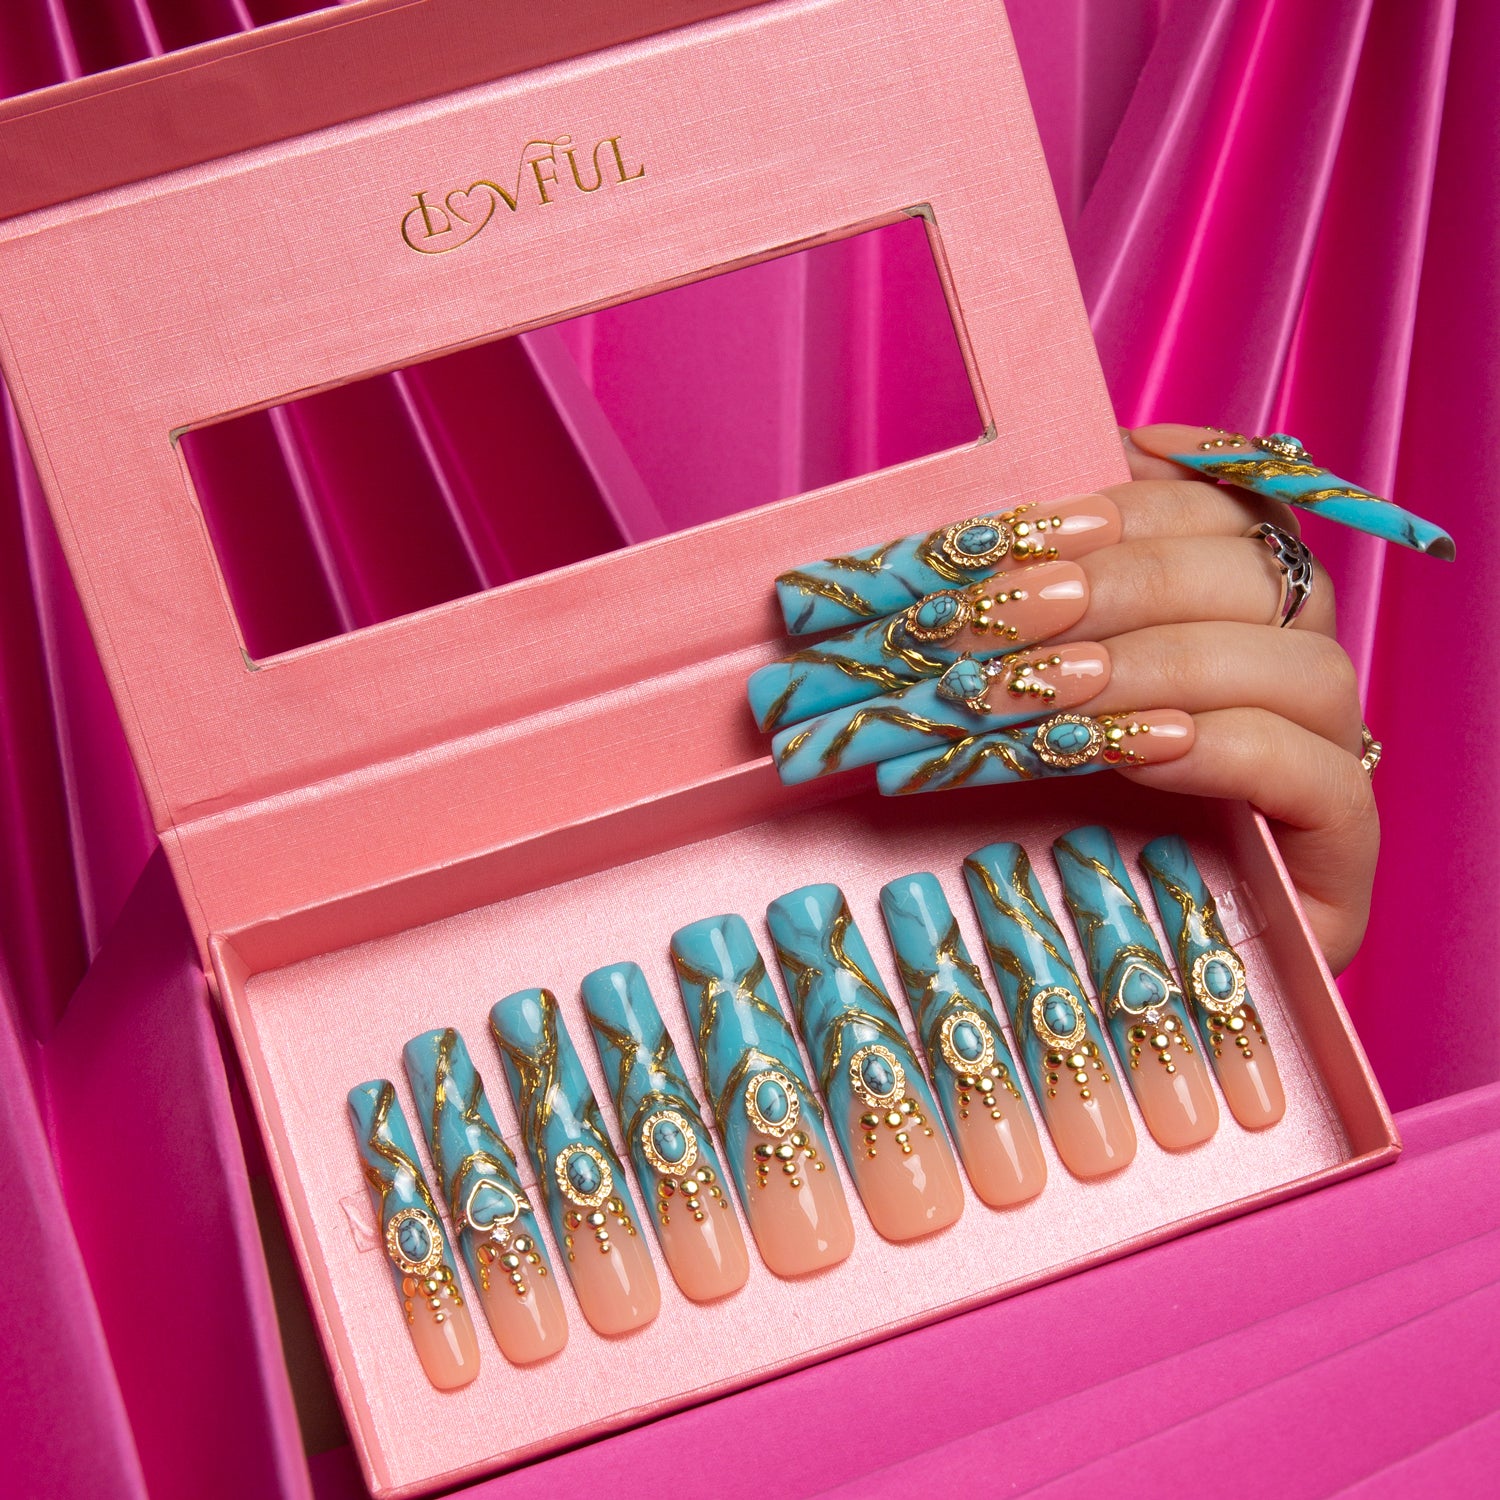 Hand wearing turquoise and gold press-on acrylic nails, displayed above matching nail set in pink Lovful branded box. Nails feature intricate golden decor and sparkling gems, set against a pink fabric backdrop.